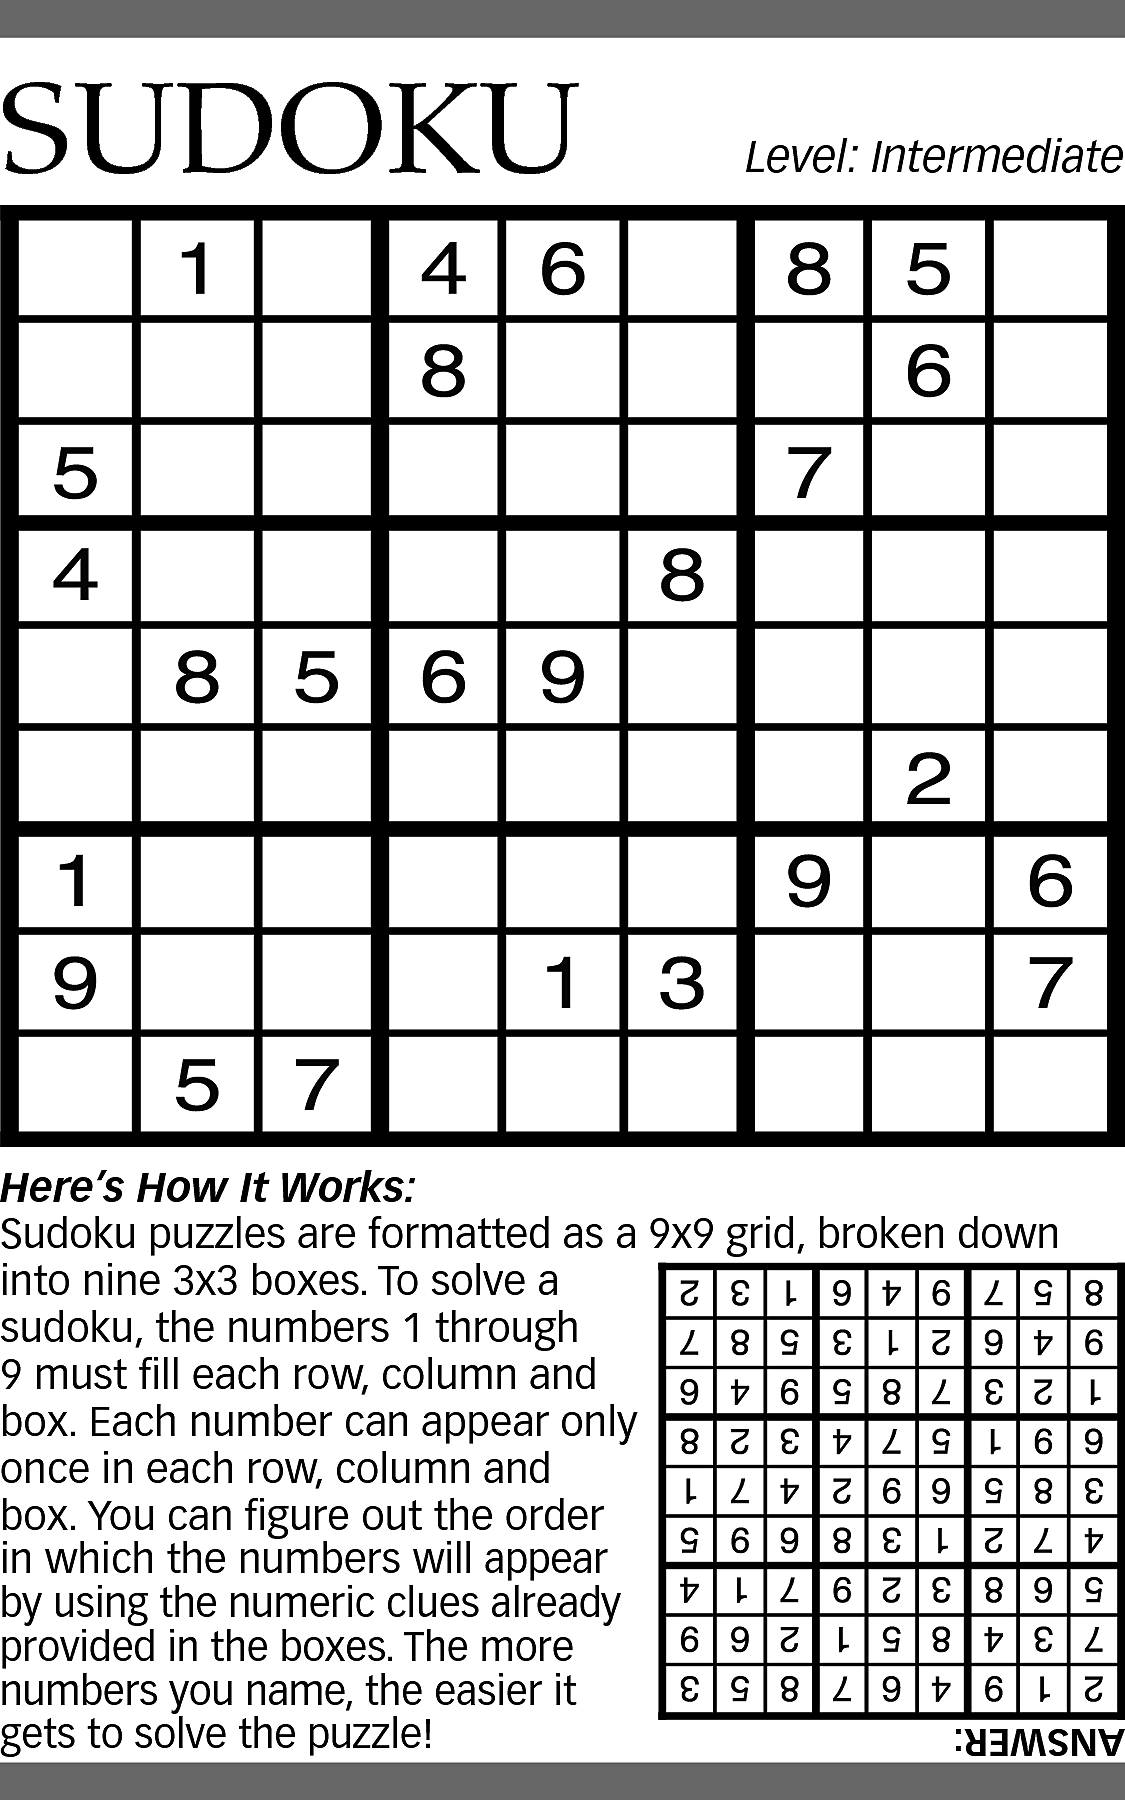 SUDOKU <br> <br>Level: Intermediate <br>  SUDOKU    Level: Intermediate    Here’s How It Works:  Sudoku puzzles are formatted as a 9x9 grid, broken down  into nine 3x3 boxes. To solve a  sudoku, the numbers 1 through  9 must fill each row, column and  box. Each number can appear only  once in each row, column and  box. You can figure out the order  in which the numbers will appear  by using the numeric clues already  provided in the boxes. The more  numbers you name, the easier it  gets to solve the puzzle!    ANSWER:    